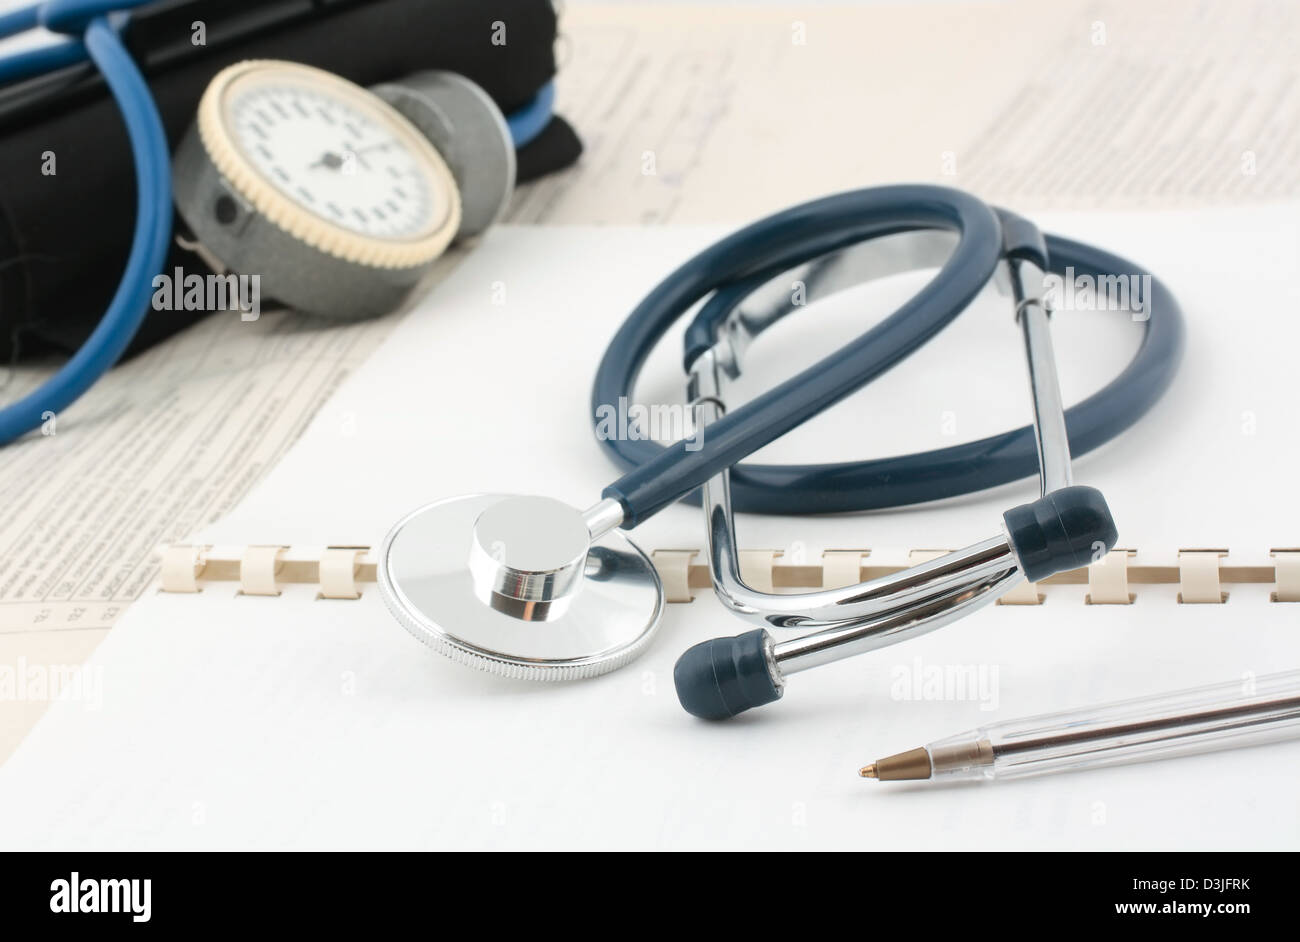 Blue stethoscope with pressure measuring instrument on blanks Stock Photo